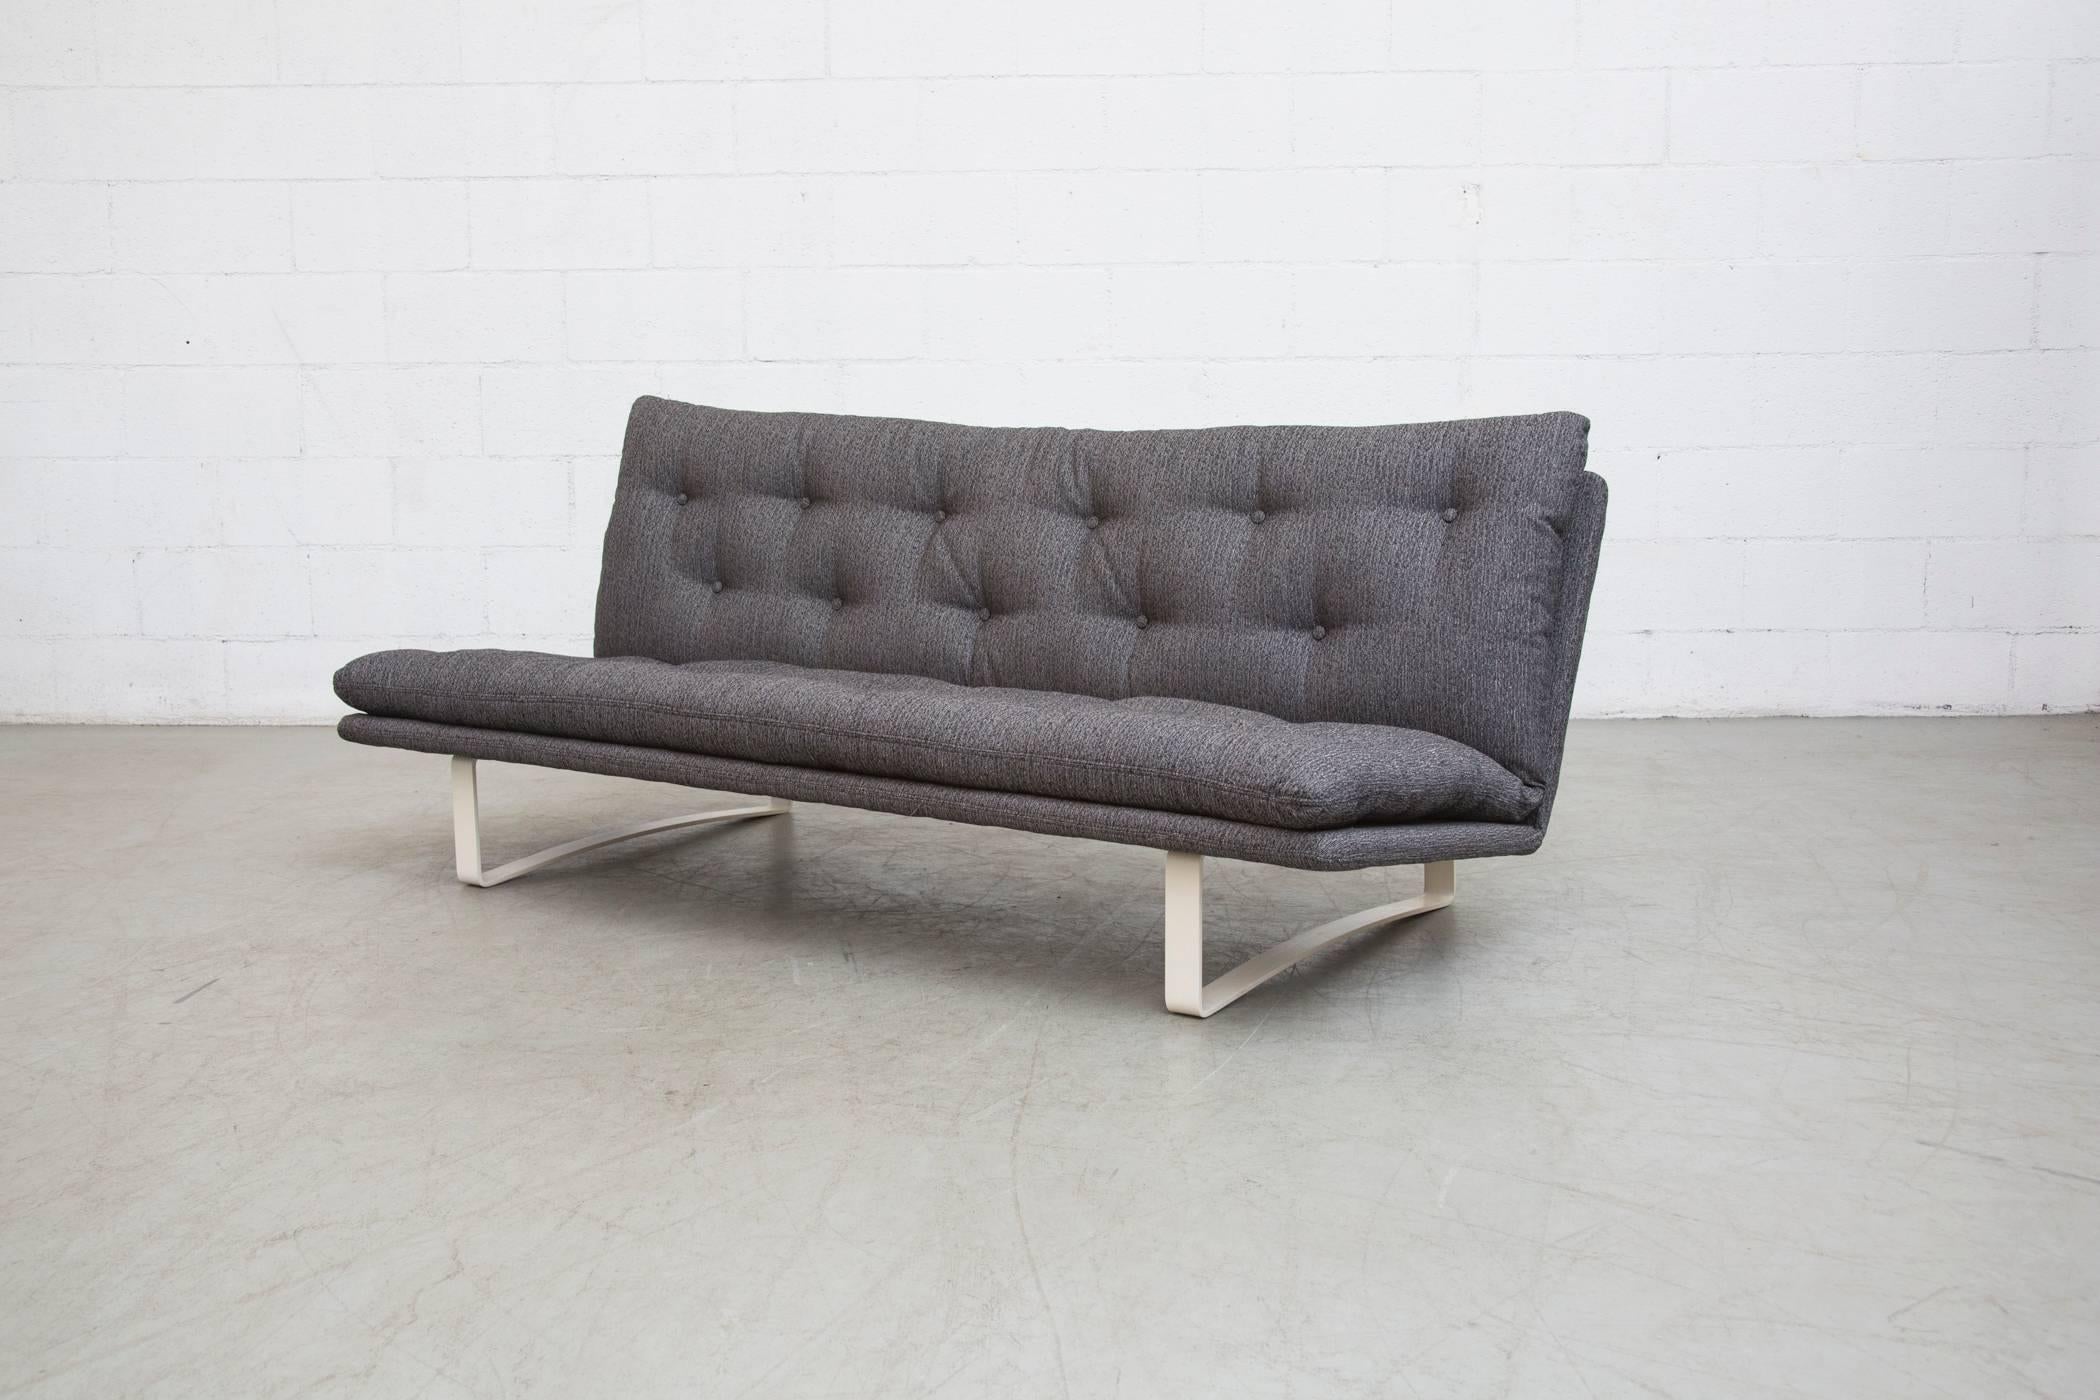 Amazing low, stealth and tufted three-seat sofa in new charcoal upholstery with bone enameled metal frame. Design by Kho Liang Ie in 1968 for Artifort, Holland. Frame in Good Condition with Some signs of wear.